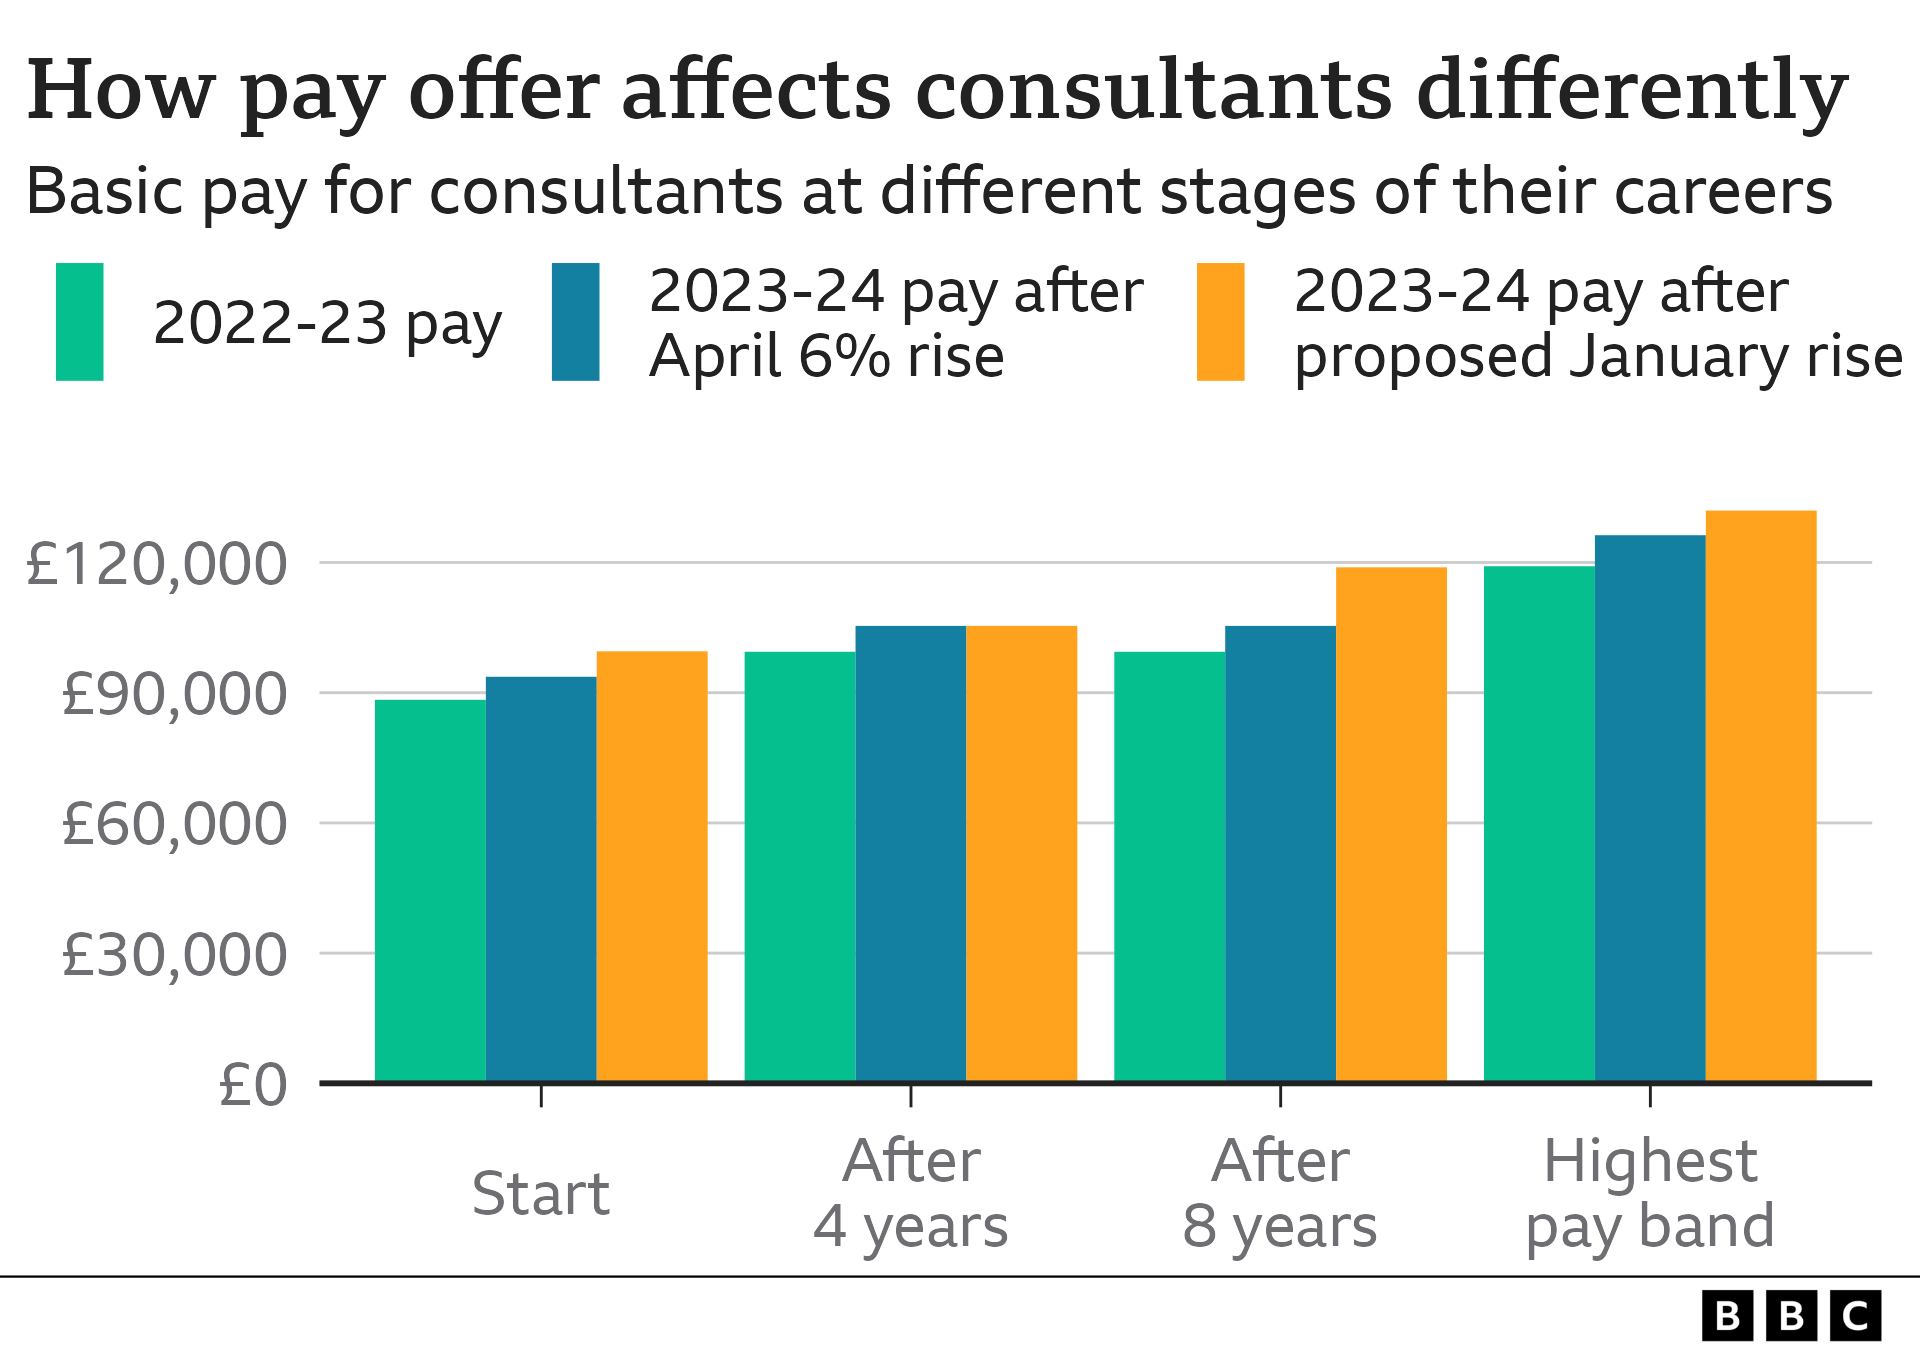 Chart showing how pay offer affects consultants differently